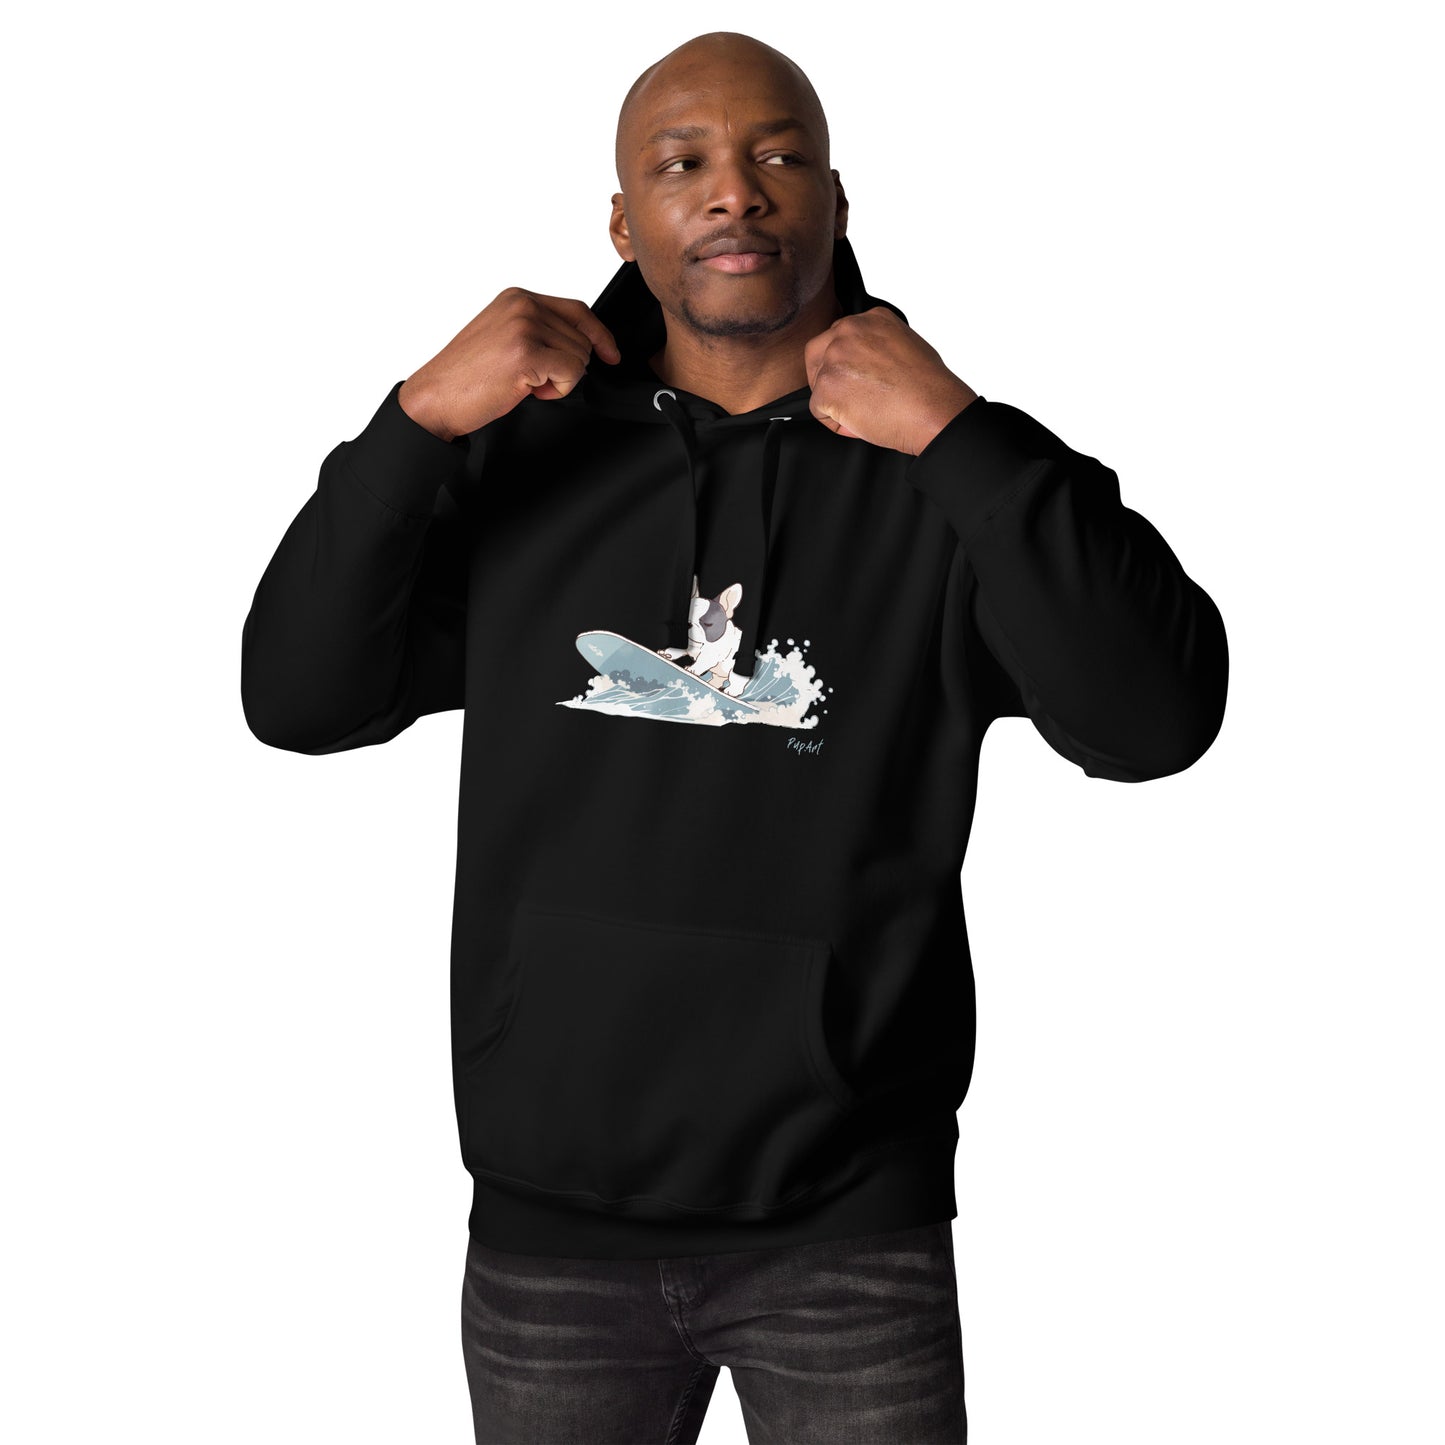 French bulldog pup surfing on a wave - Hoddie